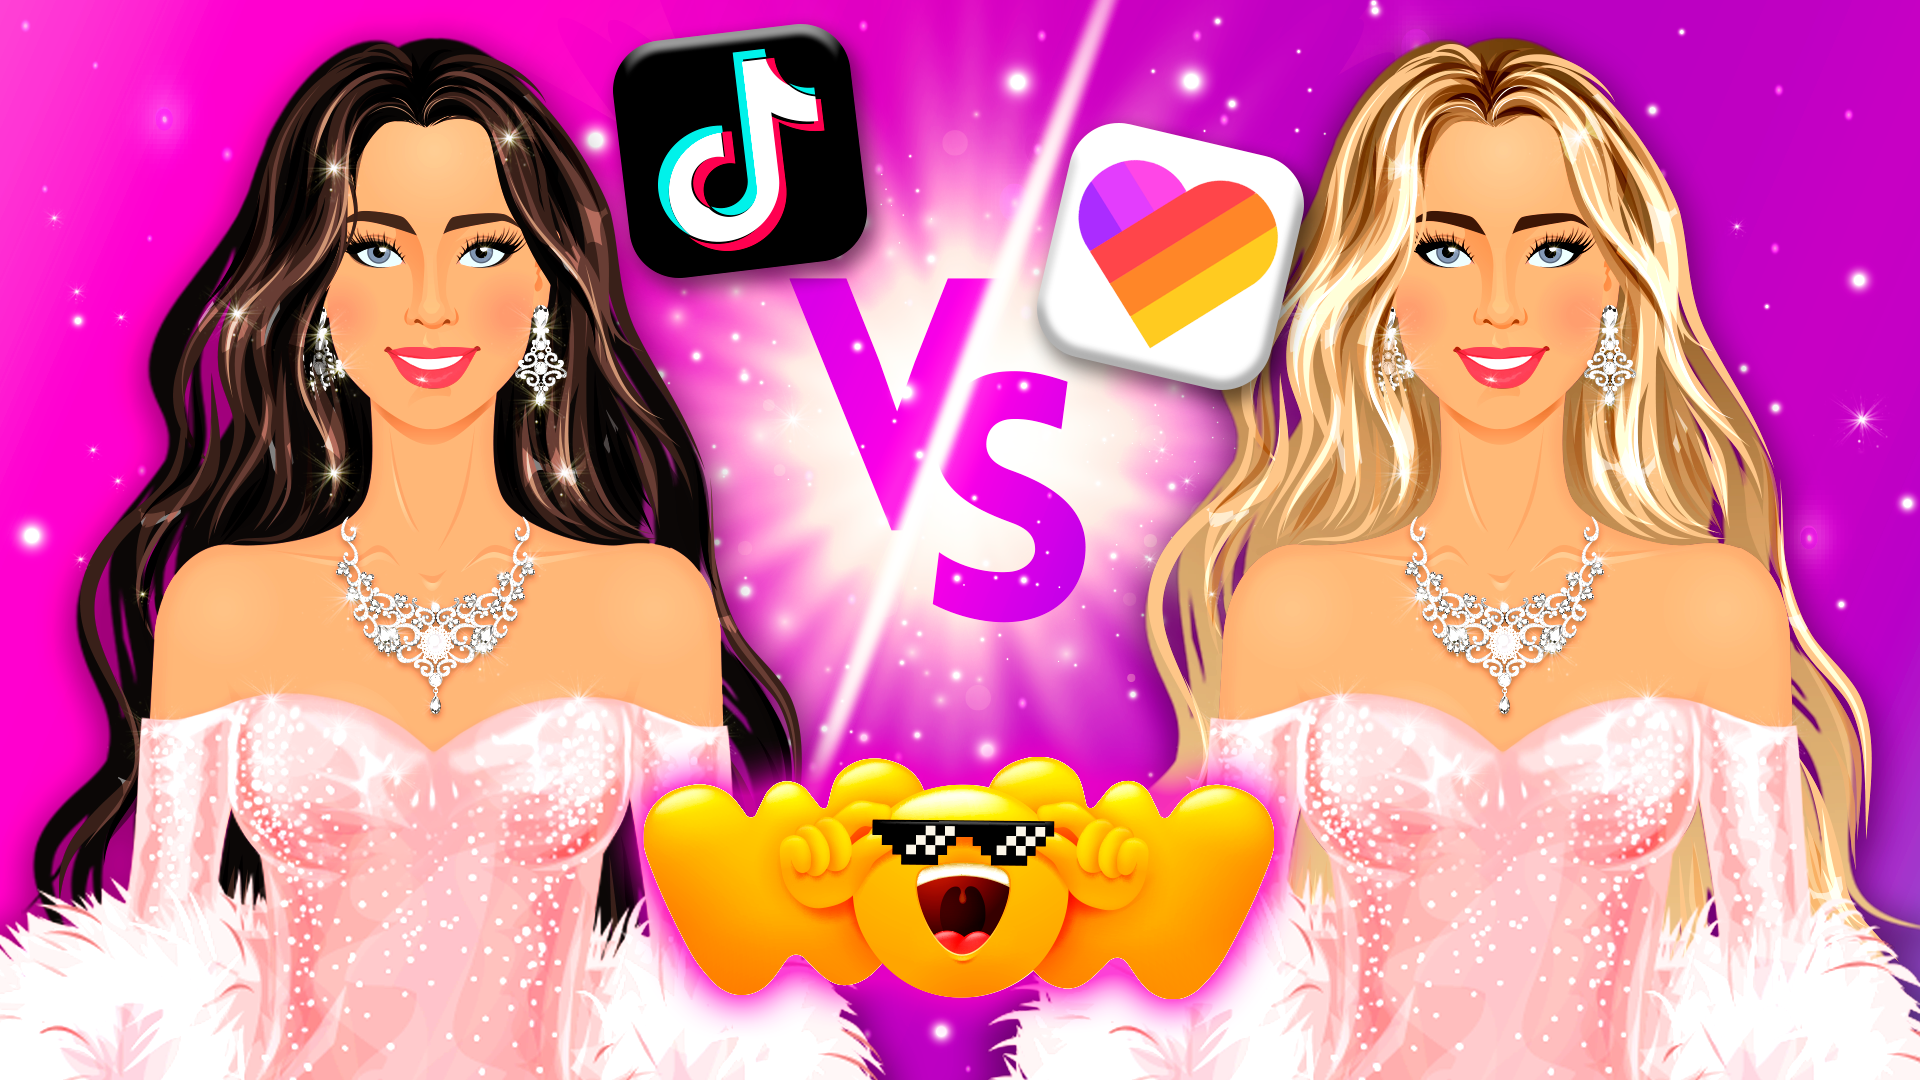 Girls games - Play free online games for girls at